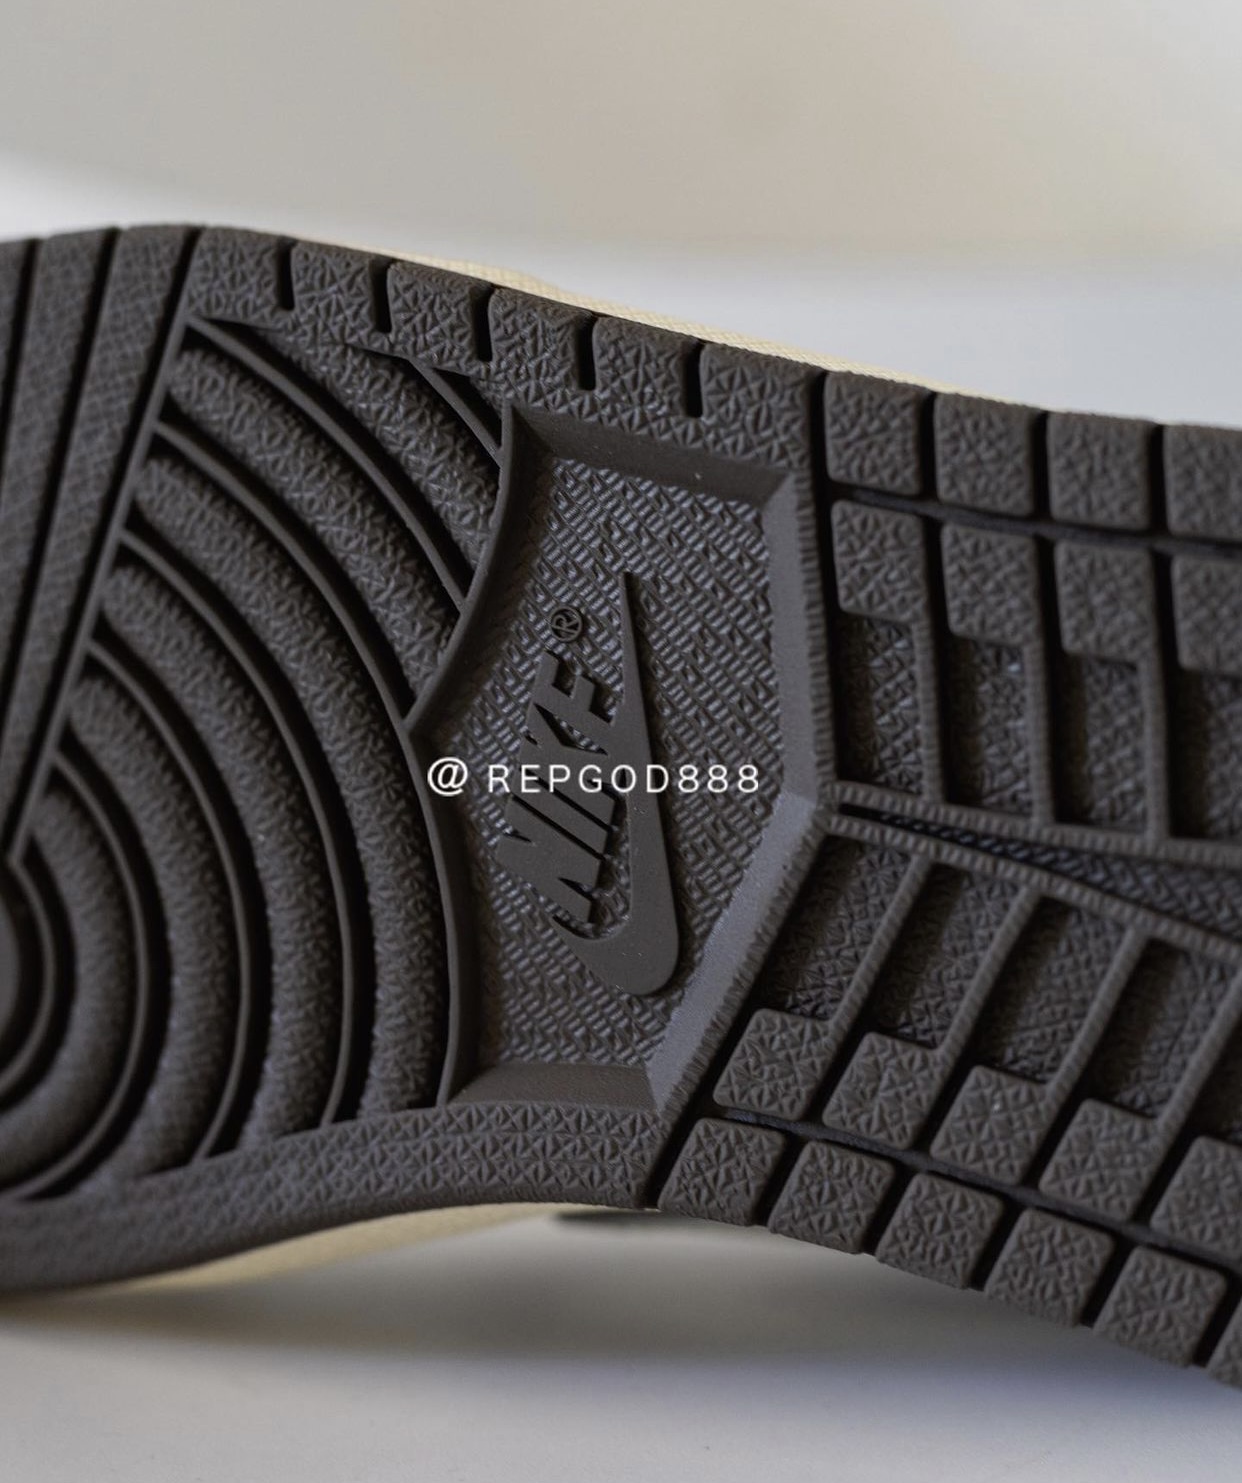 nike duck boots lunar 2015 fall schedule printable Release Date